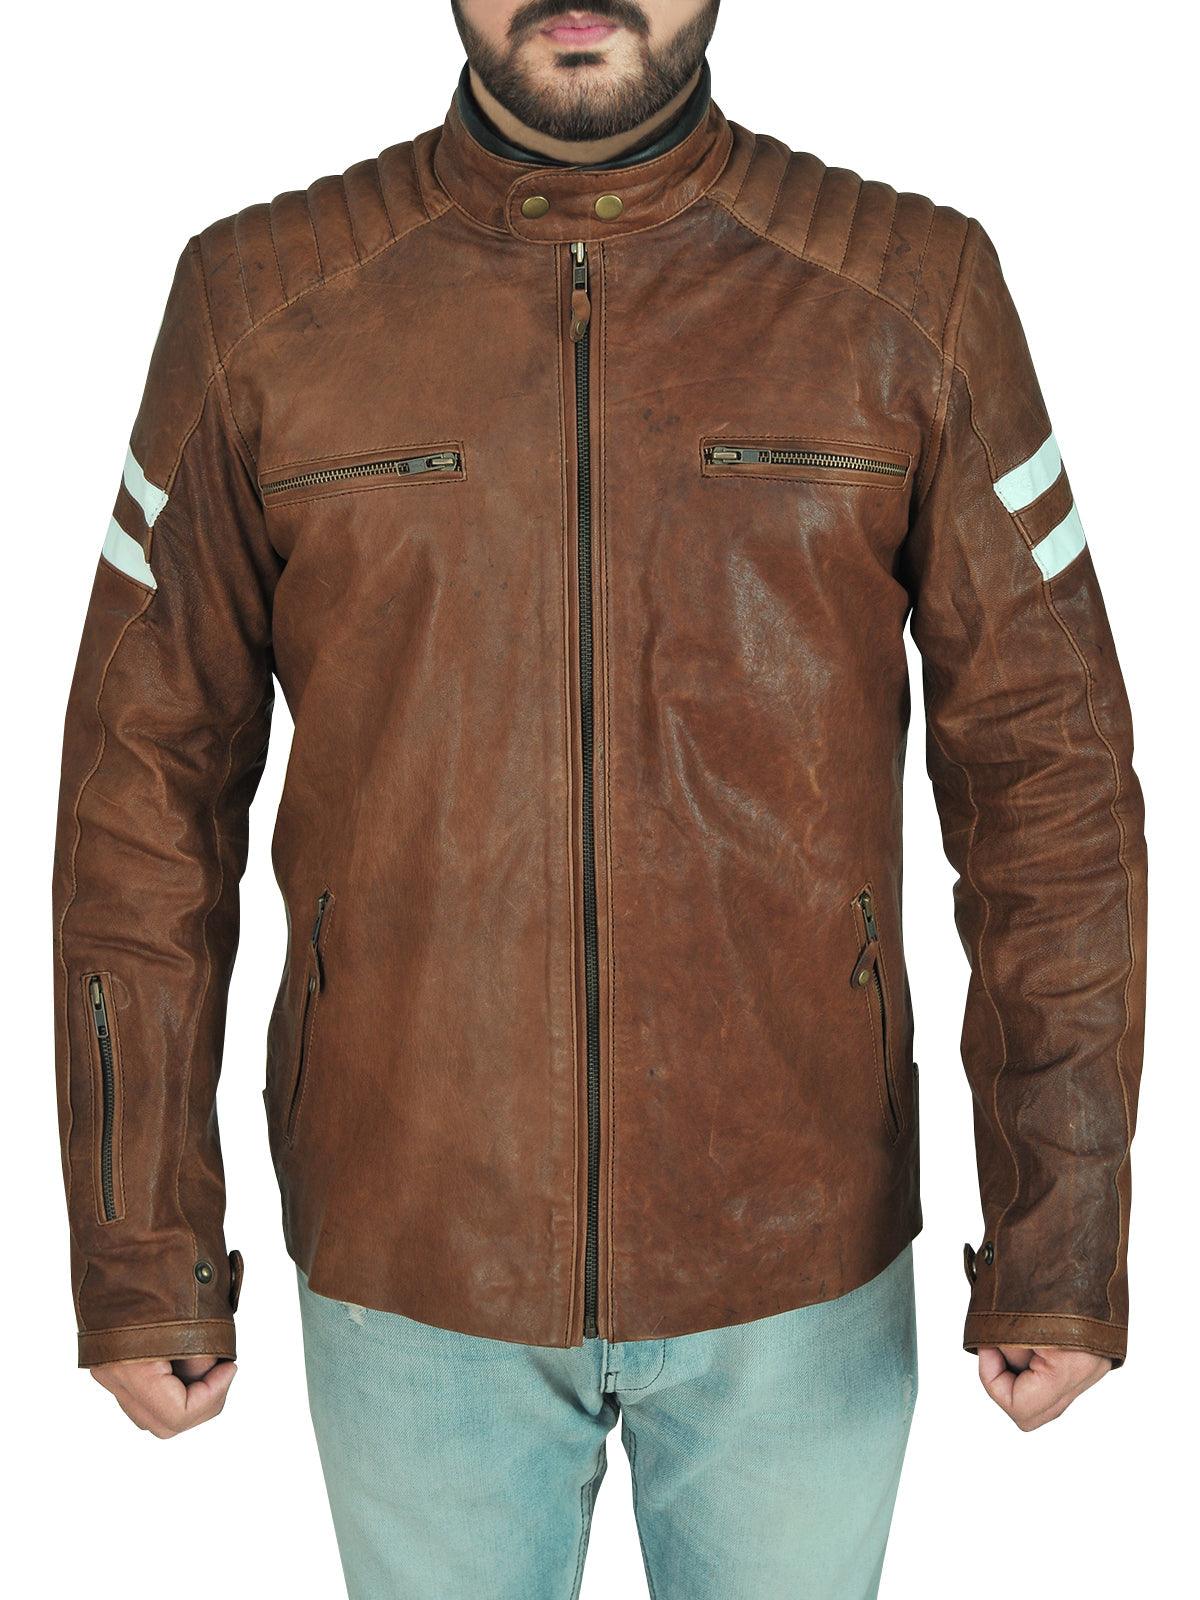 Classic Brown Leather Biker Jacket - Leather Loom